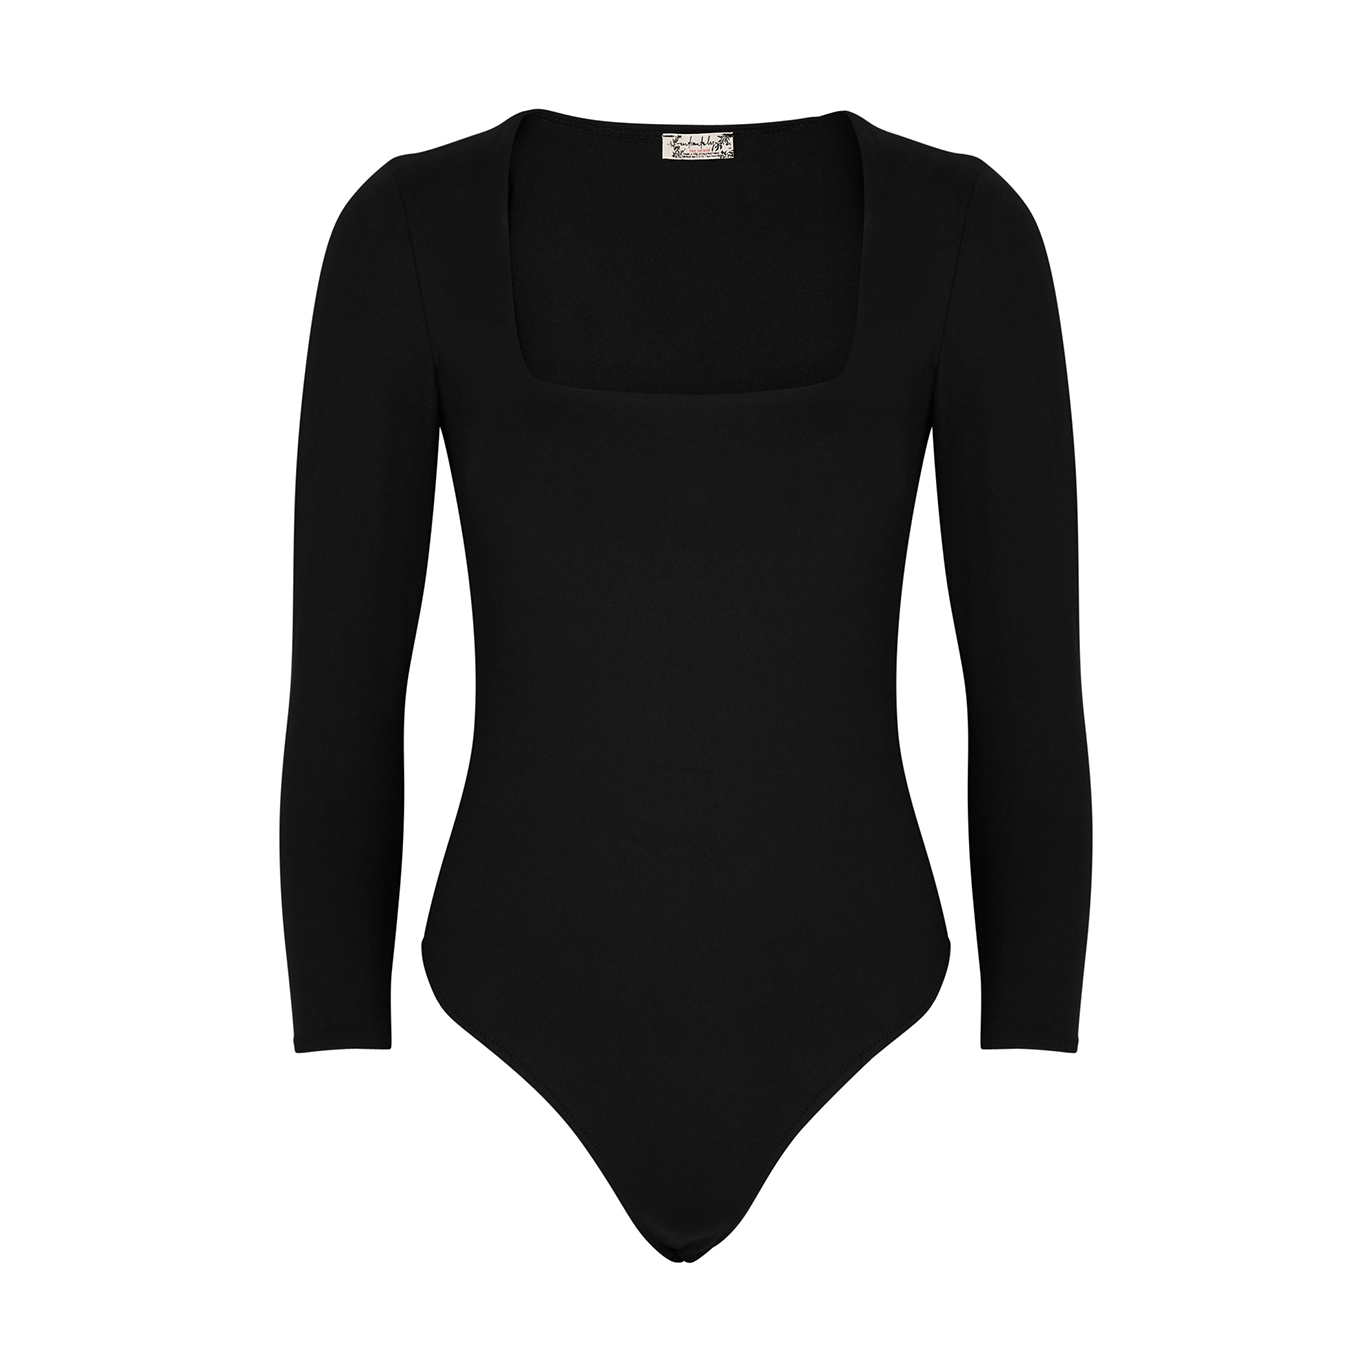 Free People Truth Or Square Black Stretch-jersey Bodysuit - XS